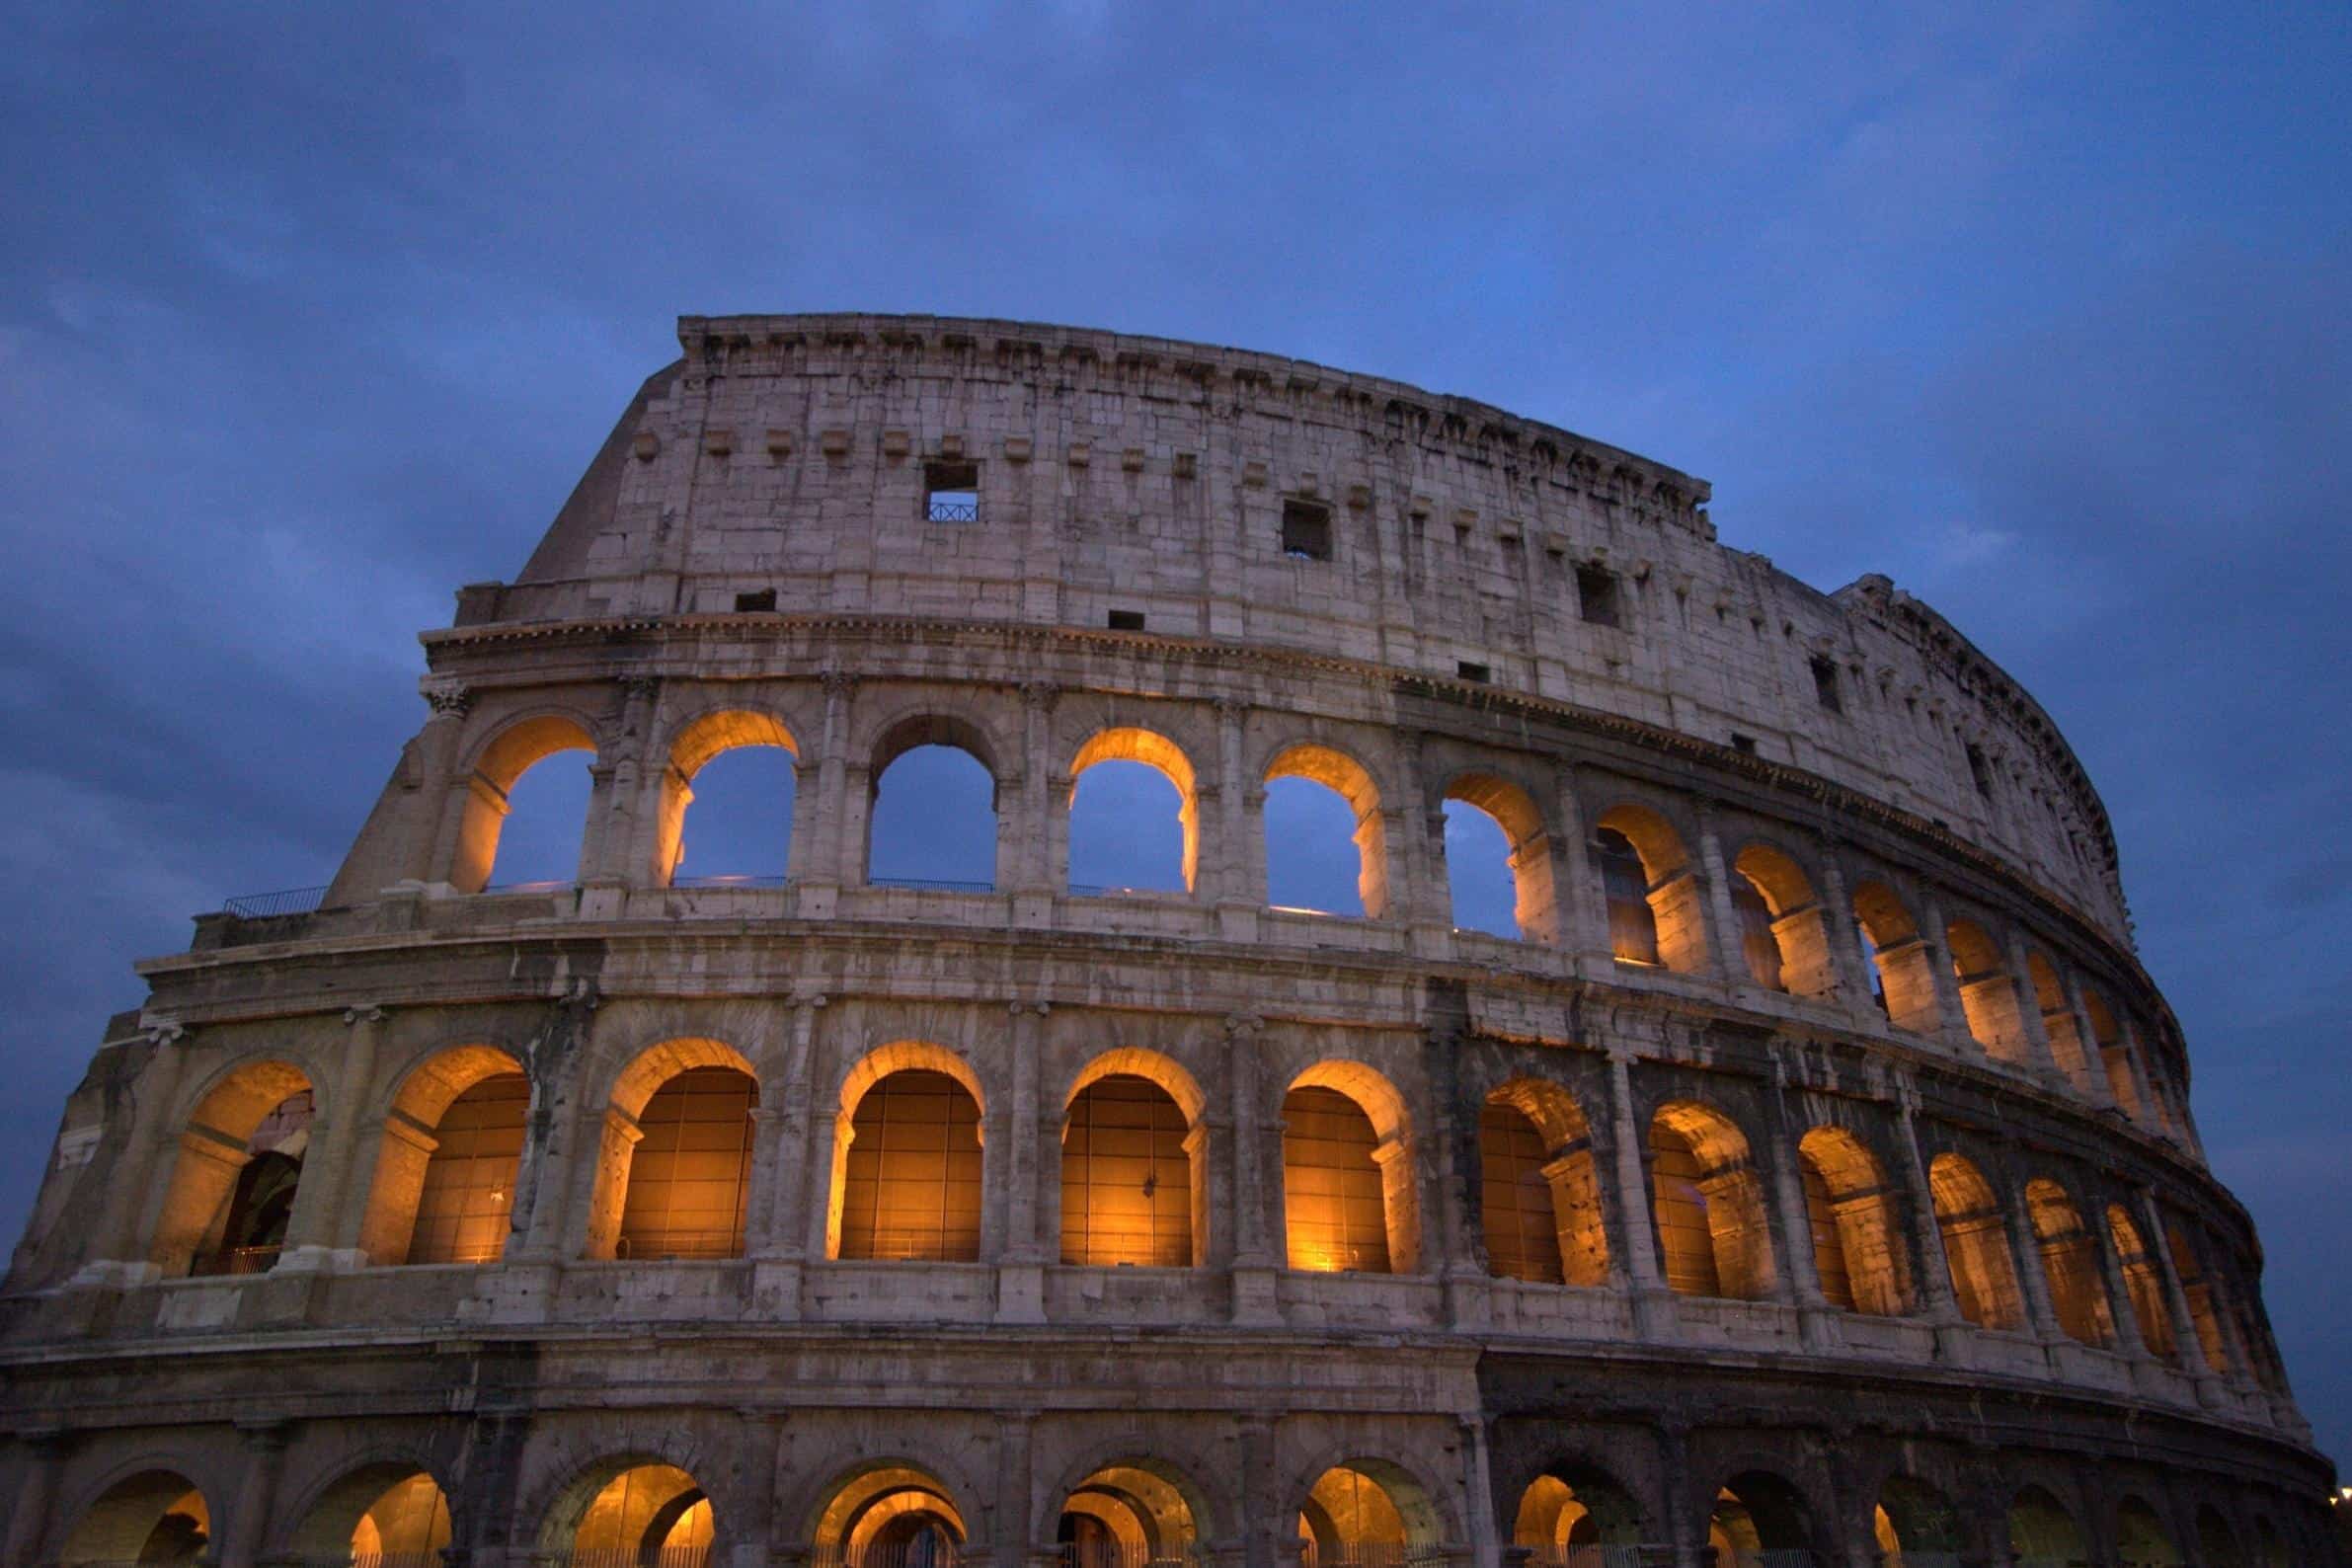 Free picture: architecture, ancient, Colosseum, Rome, Italy, medieval ...